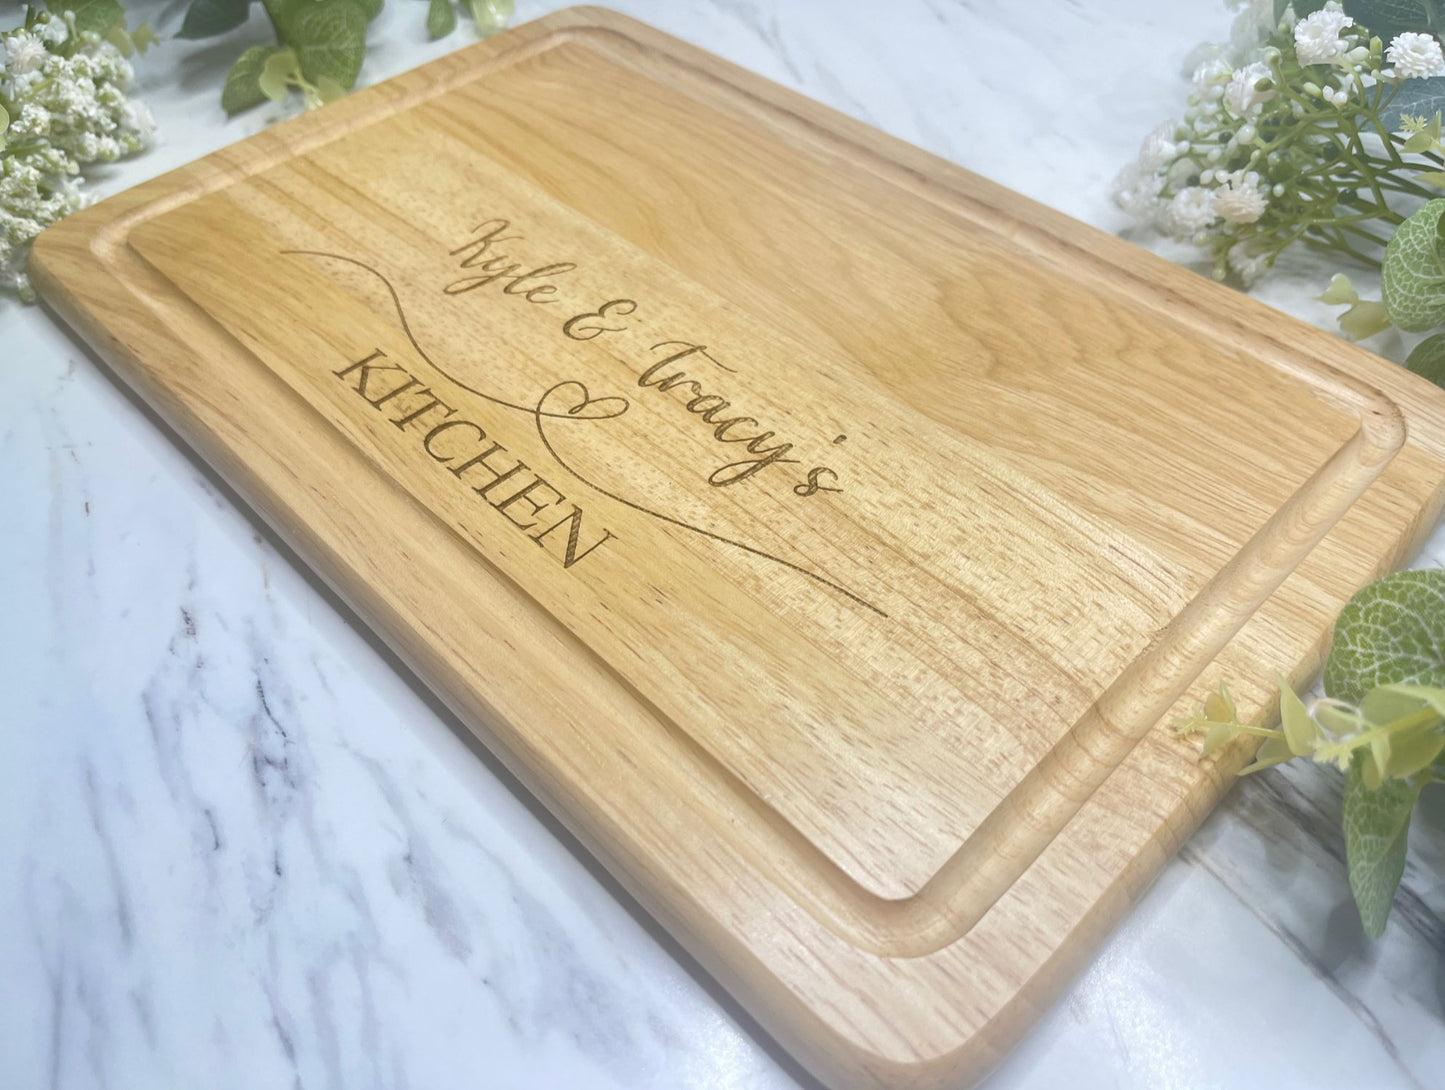 Personalised Engraved Wooden Chopping Board, personalise you5r chopping board with a name on the left and side and name on the right, underneath is a heart then the word kitchen at the bottom. This is make from Hevea Wood & the size is 300mmX200mm. Perfect gift for any couple.